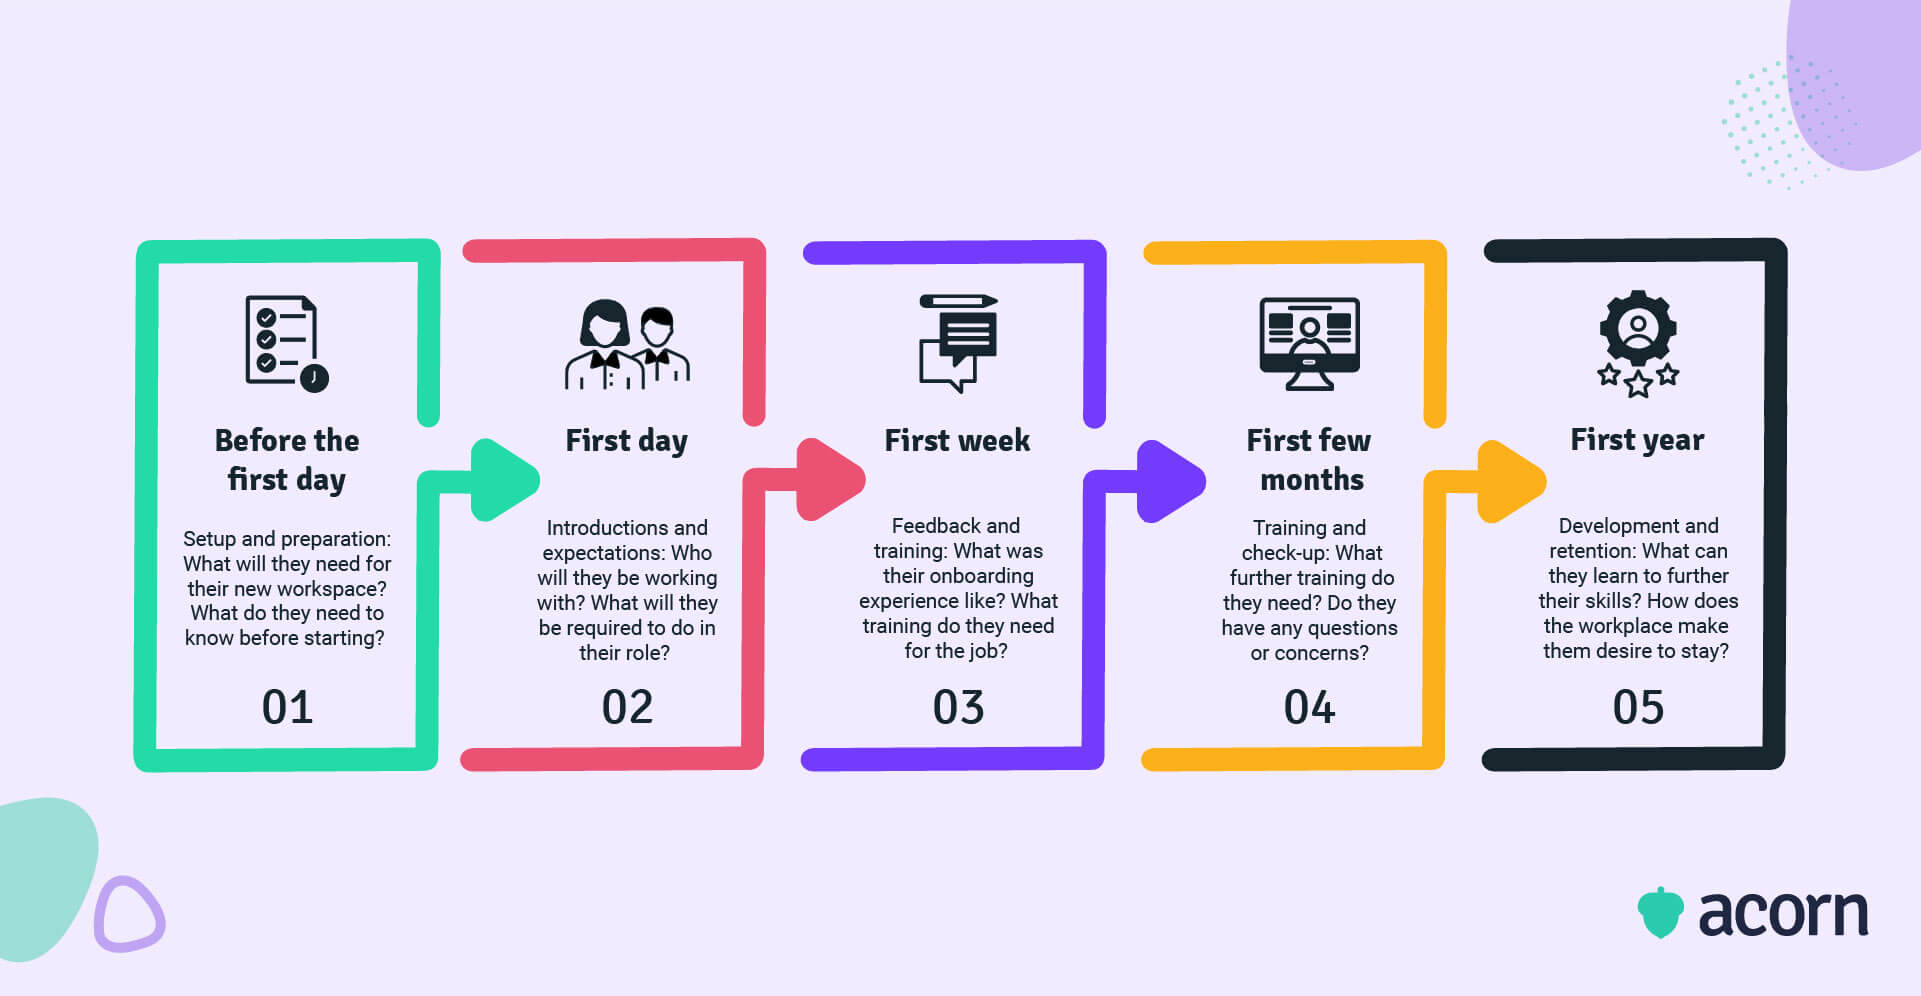 Infographic showing the onboarding timeline from before the first day to the first year